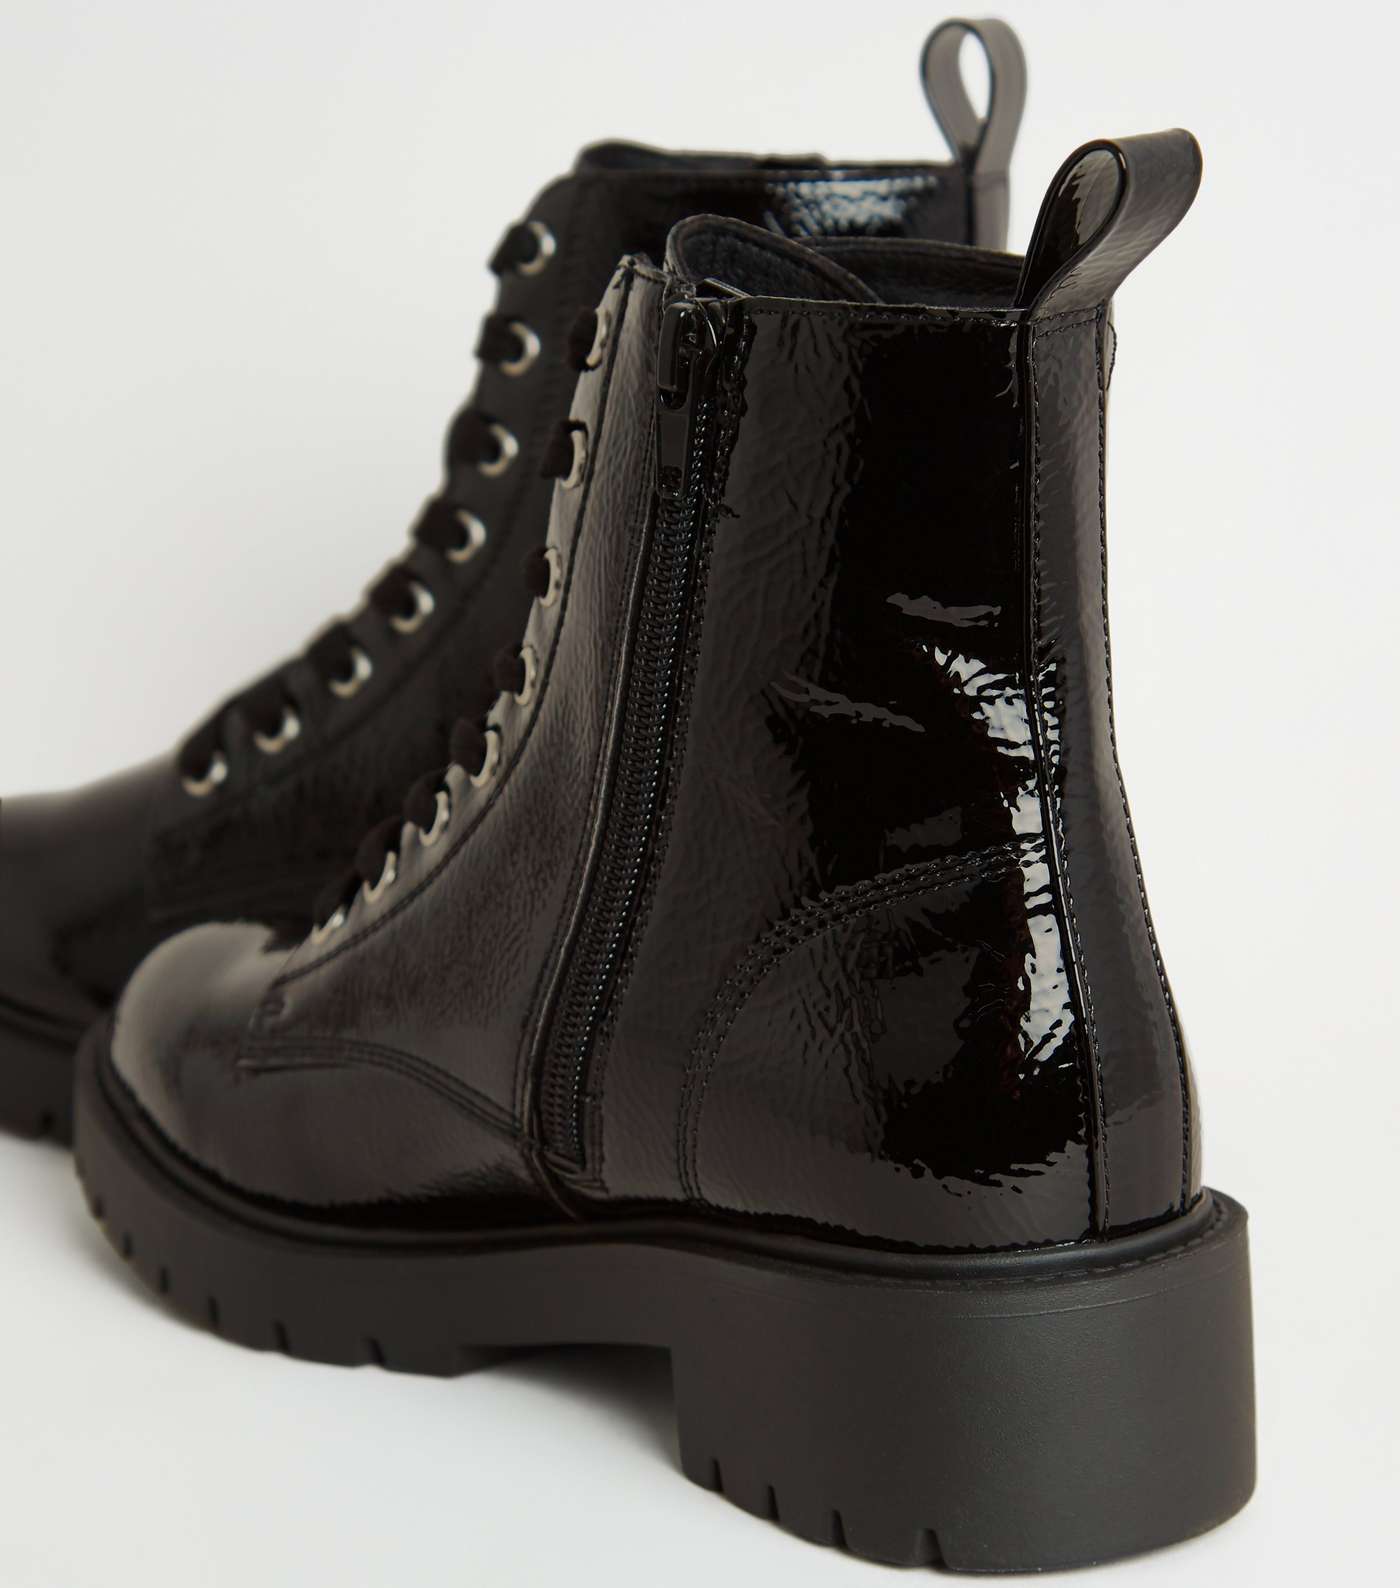 Girls Black Crinkle Patent Lace Up Boots Image 4